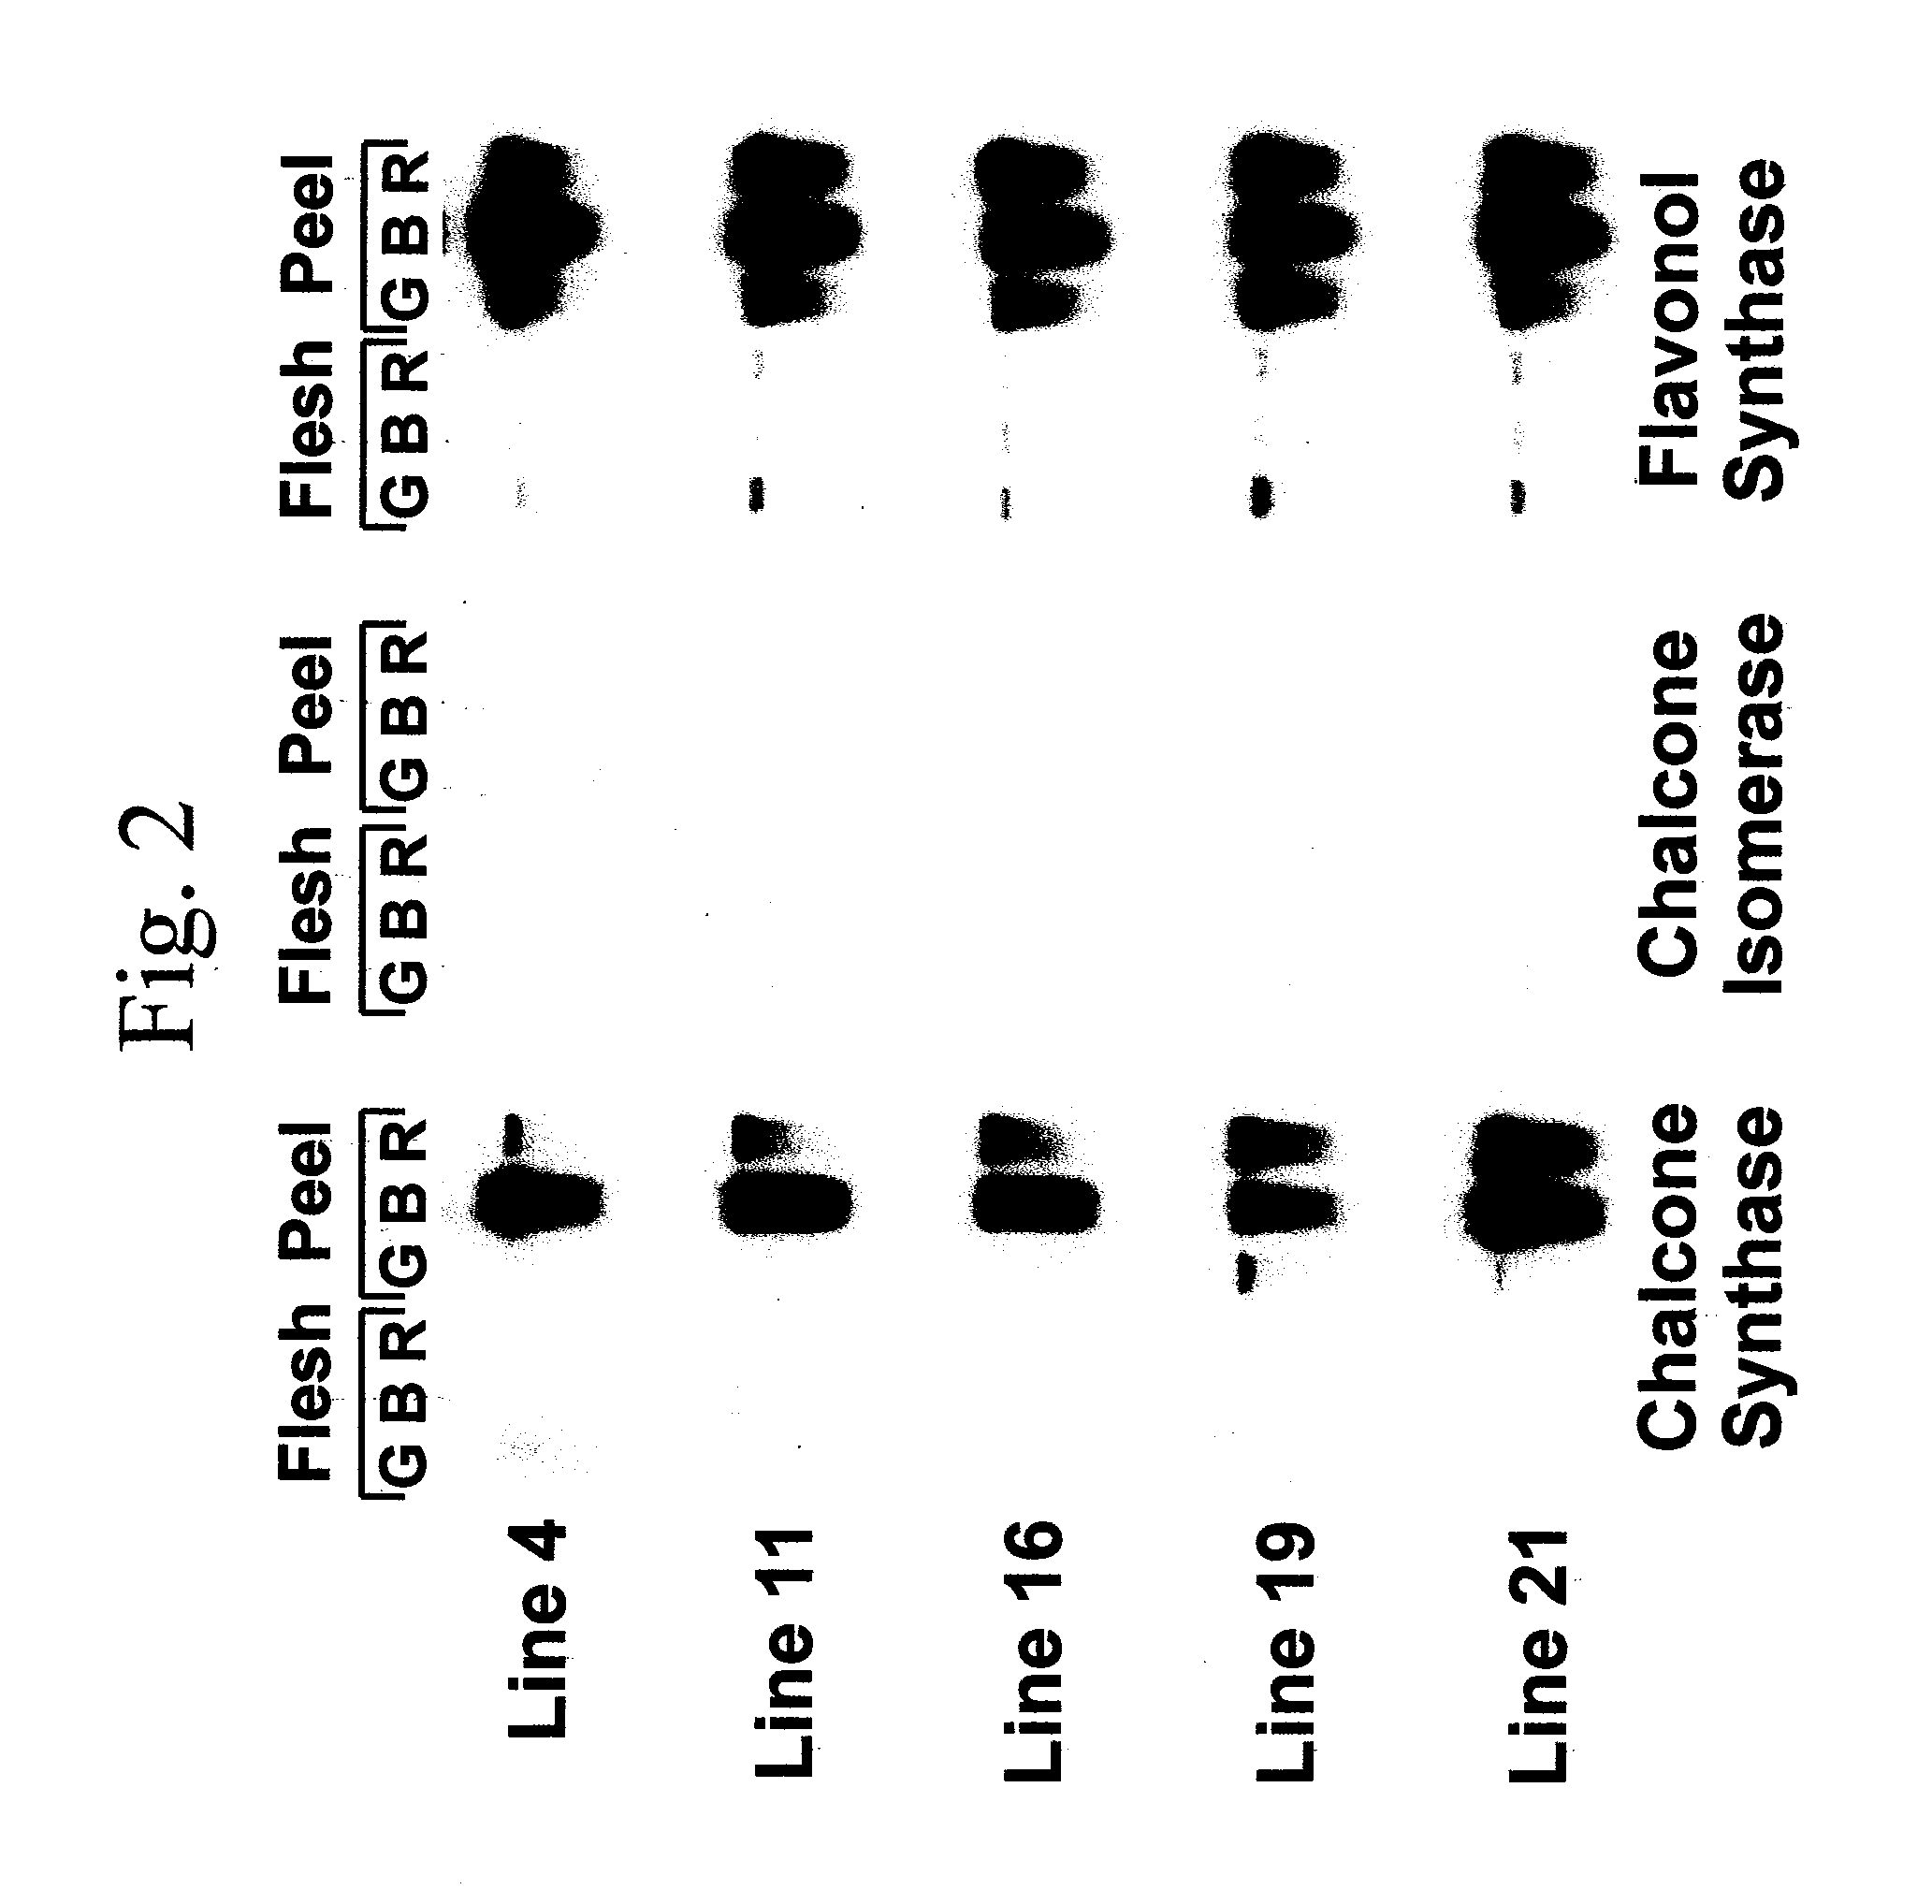 Flavonol expressing domesticated tomato and method of production